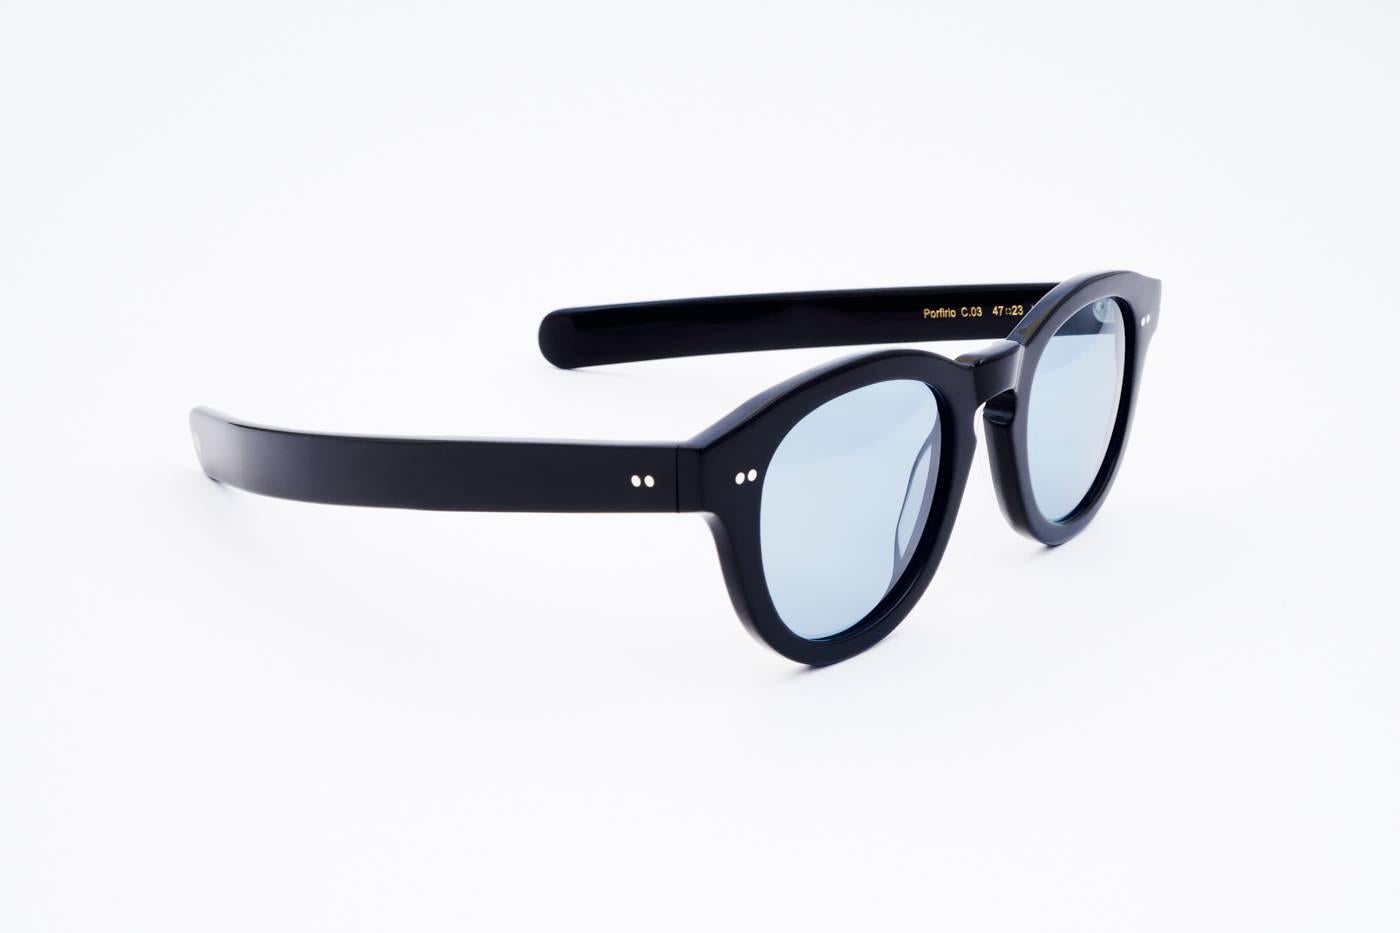 The eyewear style is named after the style icon Porfirio Rubirosa. With its chic 70’s silhouette and thick glossy acetate, Porfirio is the perfect combination of bold style and subtle sex-appeal. Contemporary glamour meets old-world Italian charm.